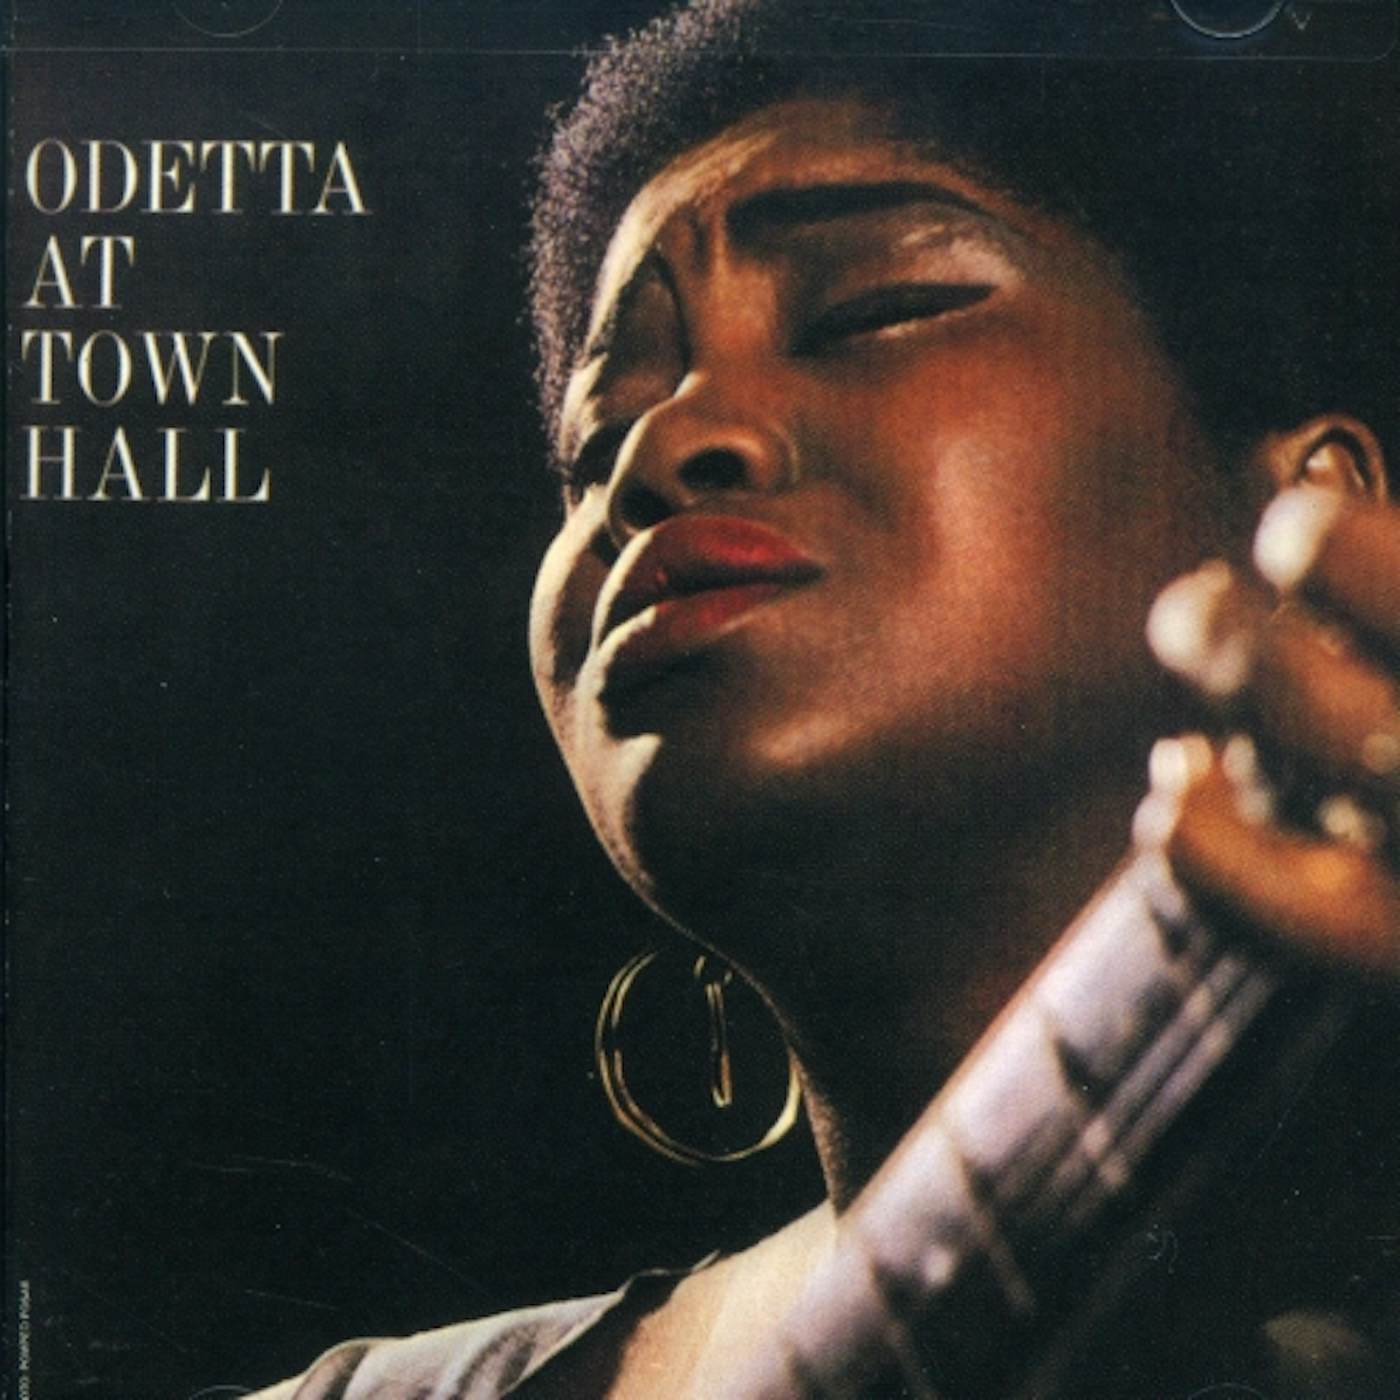 Odetta AT TOWN HALL CD